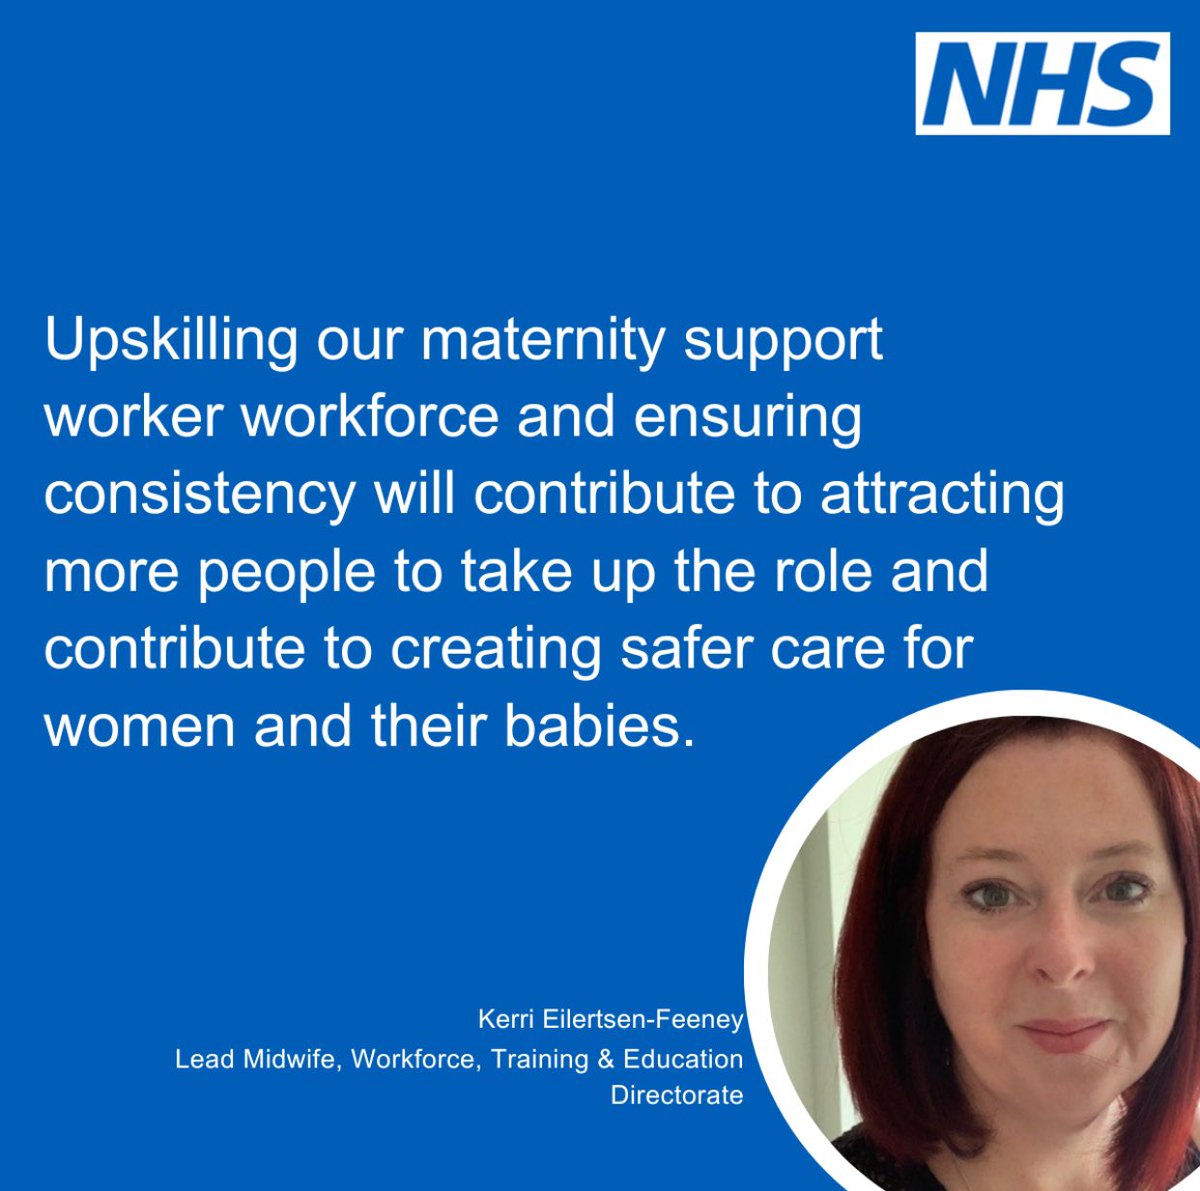 Delighted to announce the publication of the Maternity support framework and toolkit refresh. england.nhs.uk/long-read/mate…